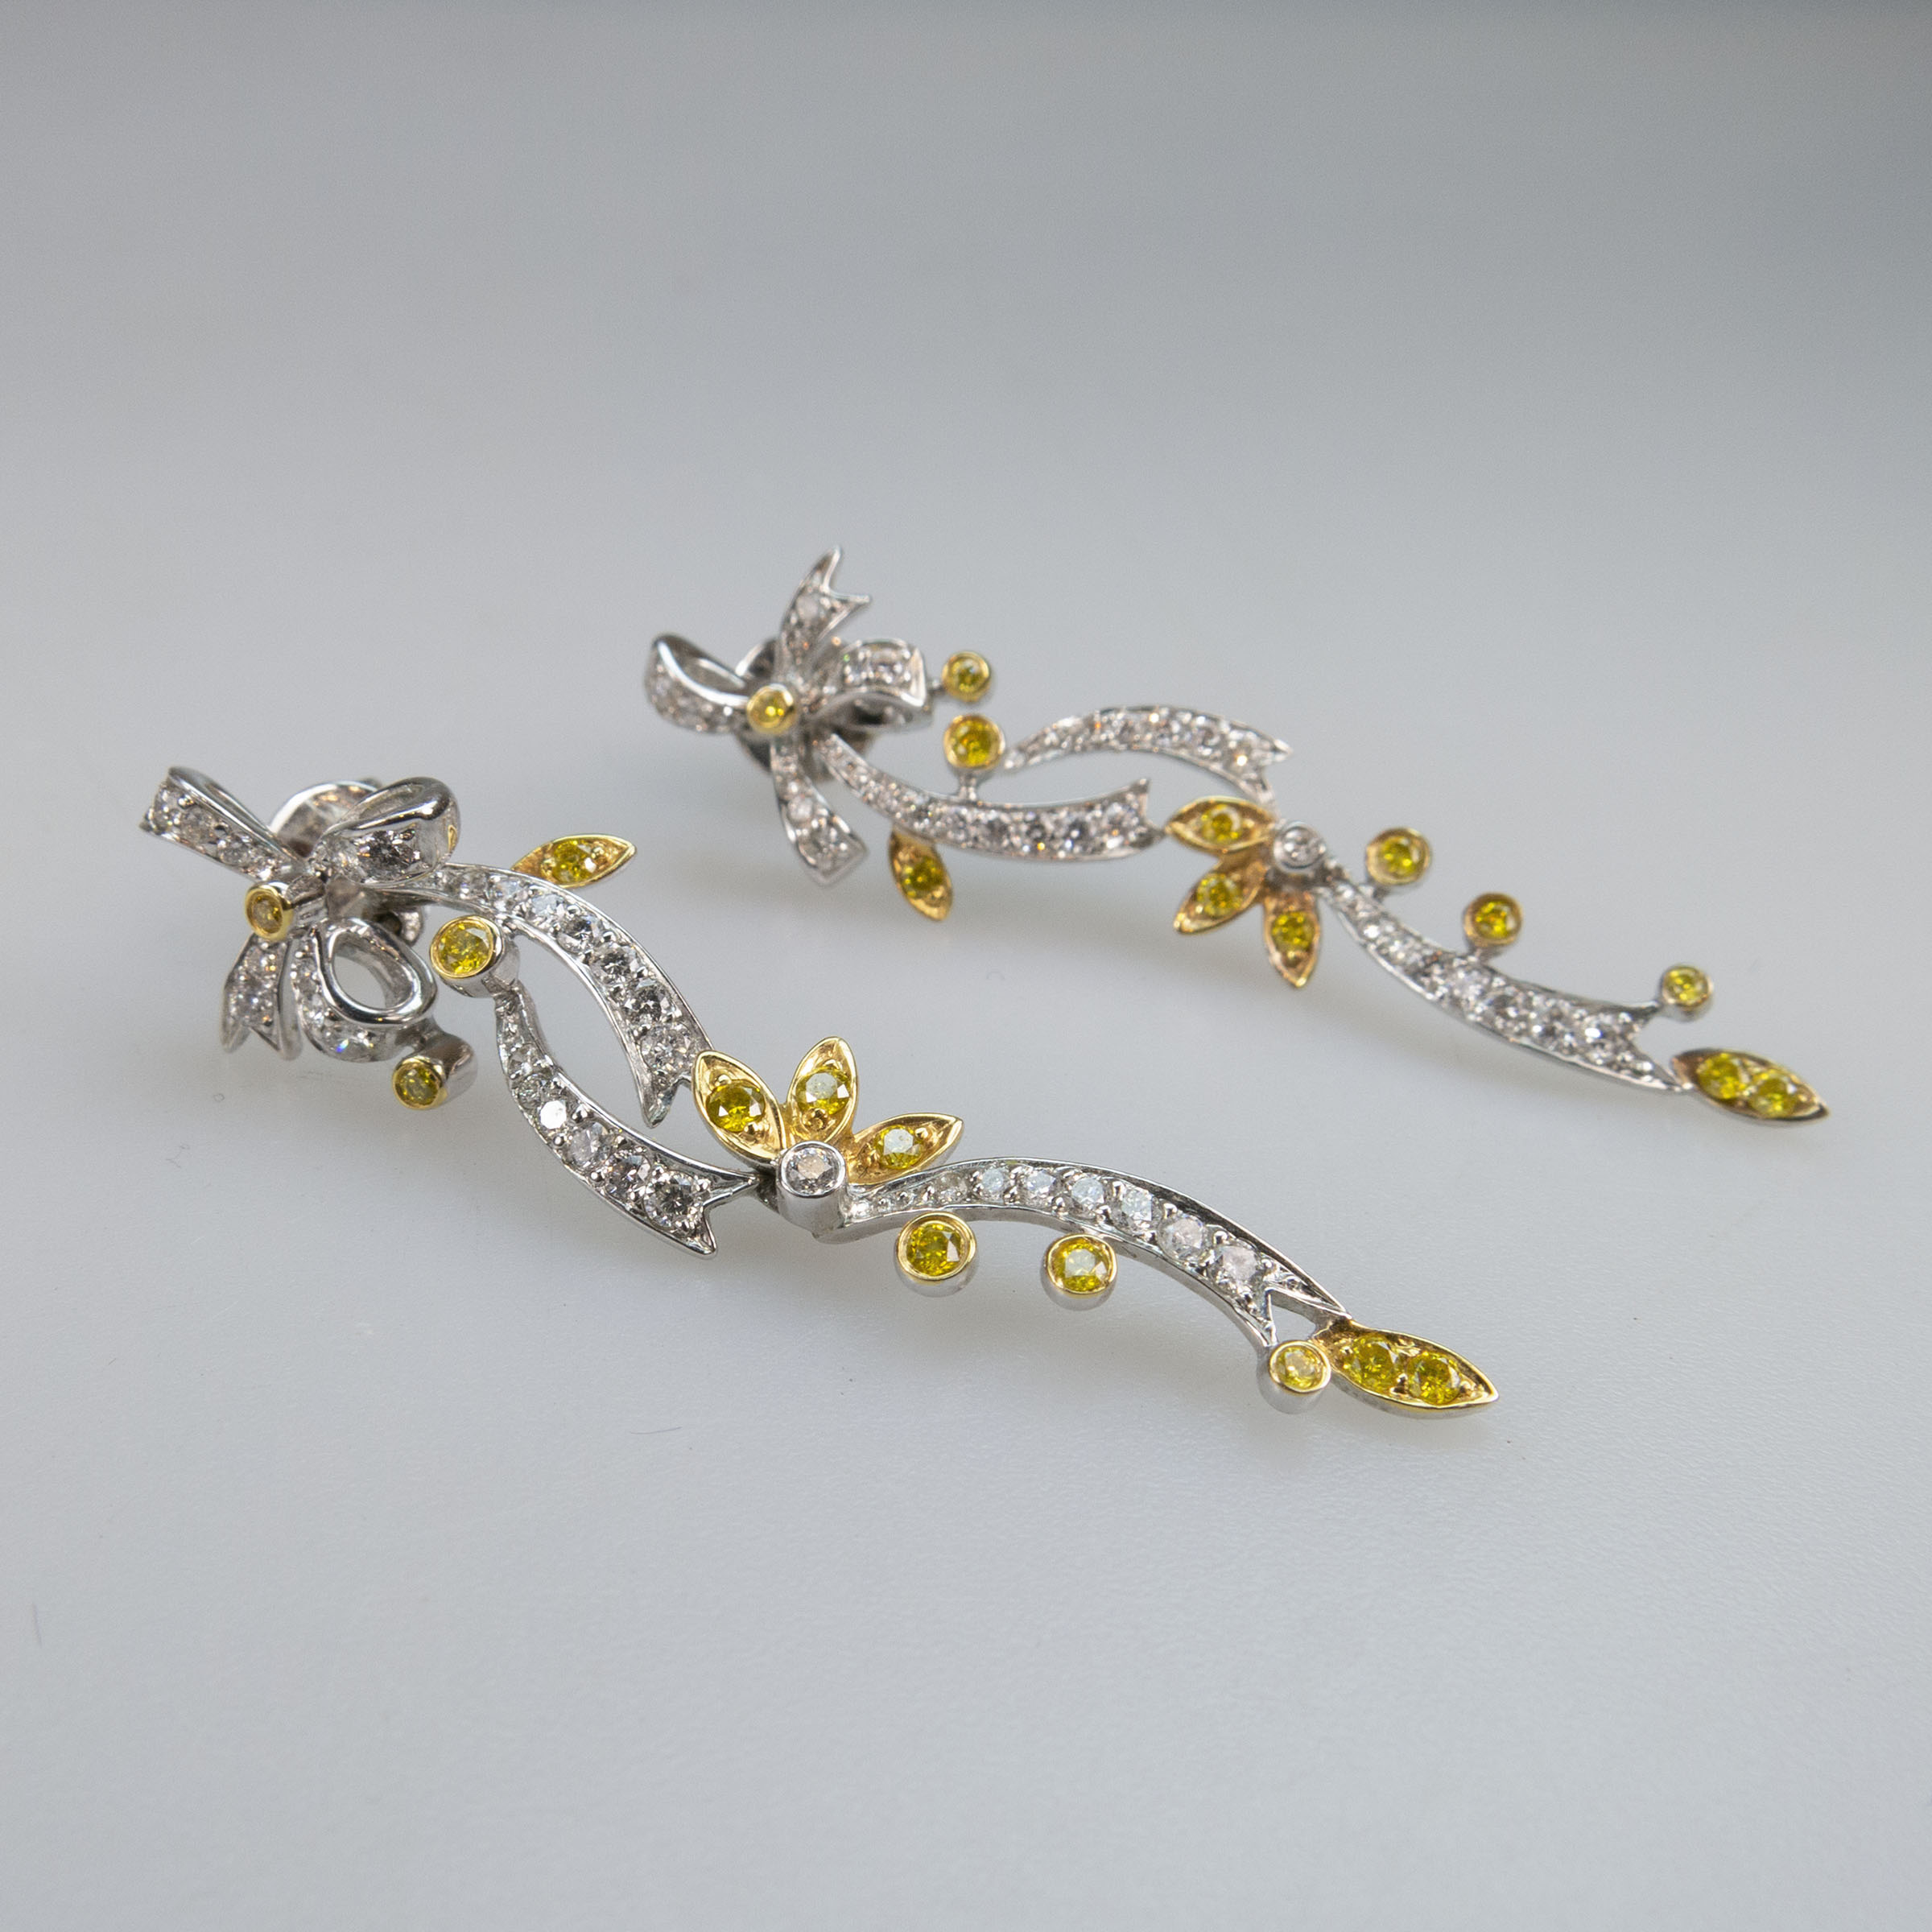 Pair Of 18k White And Yellow Gold Drop Earrings 